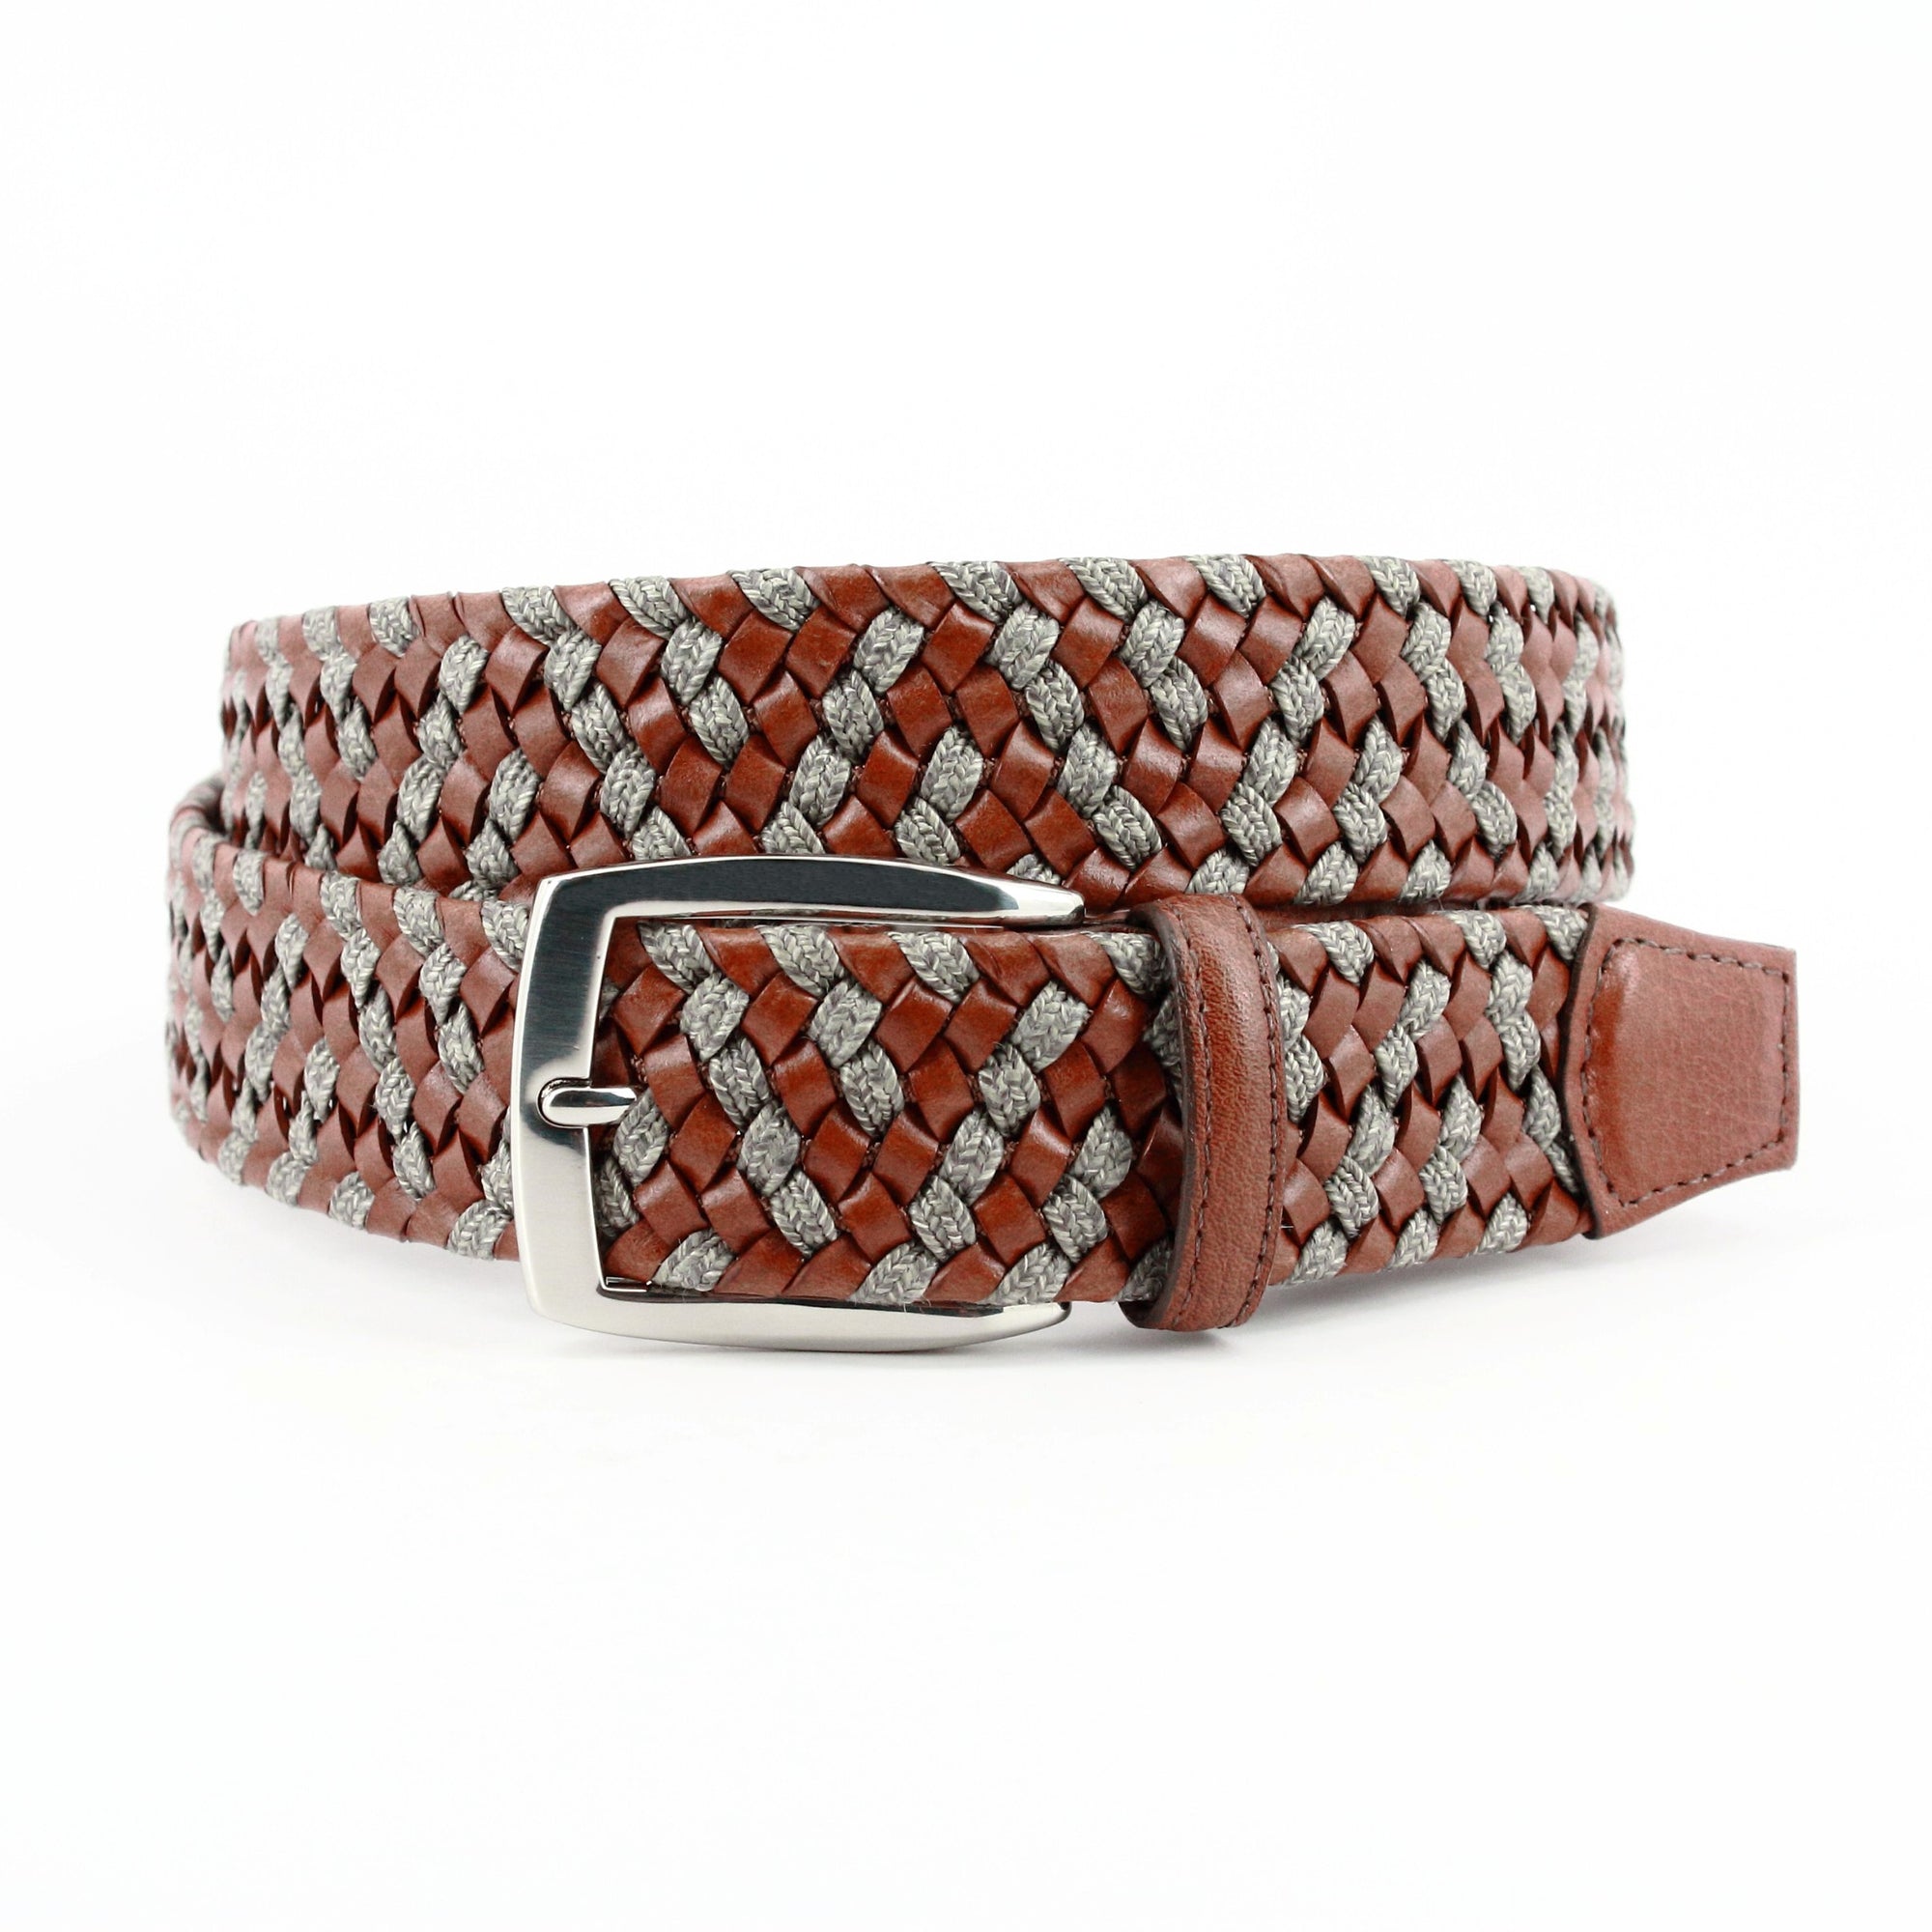 Braided Italian Leather and Linen Belt in Cognac and Taupe by Torino Leather